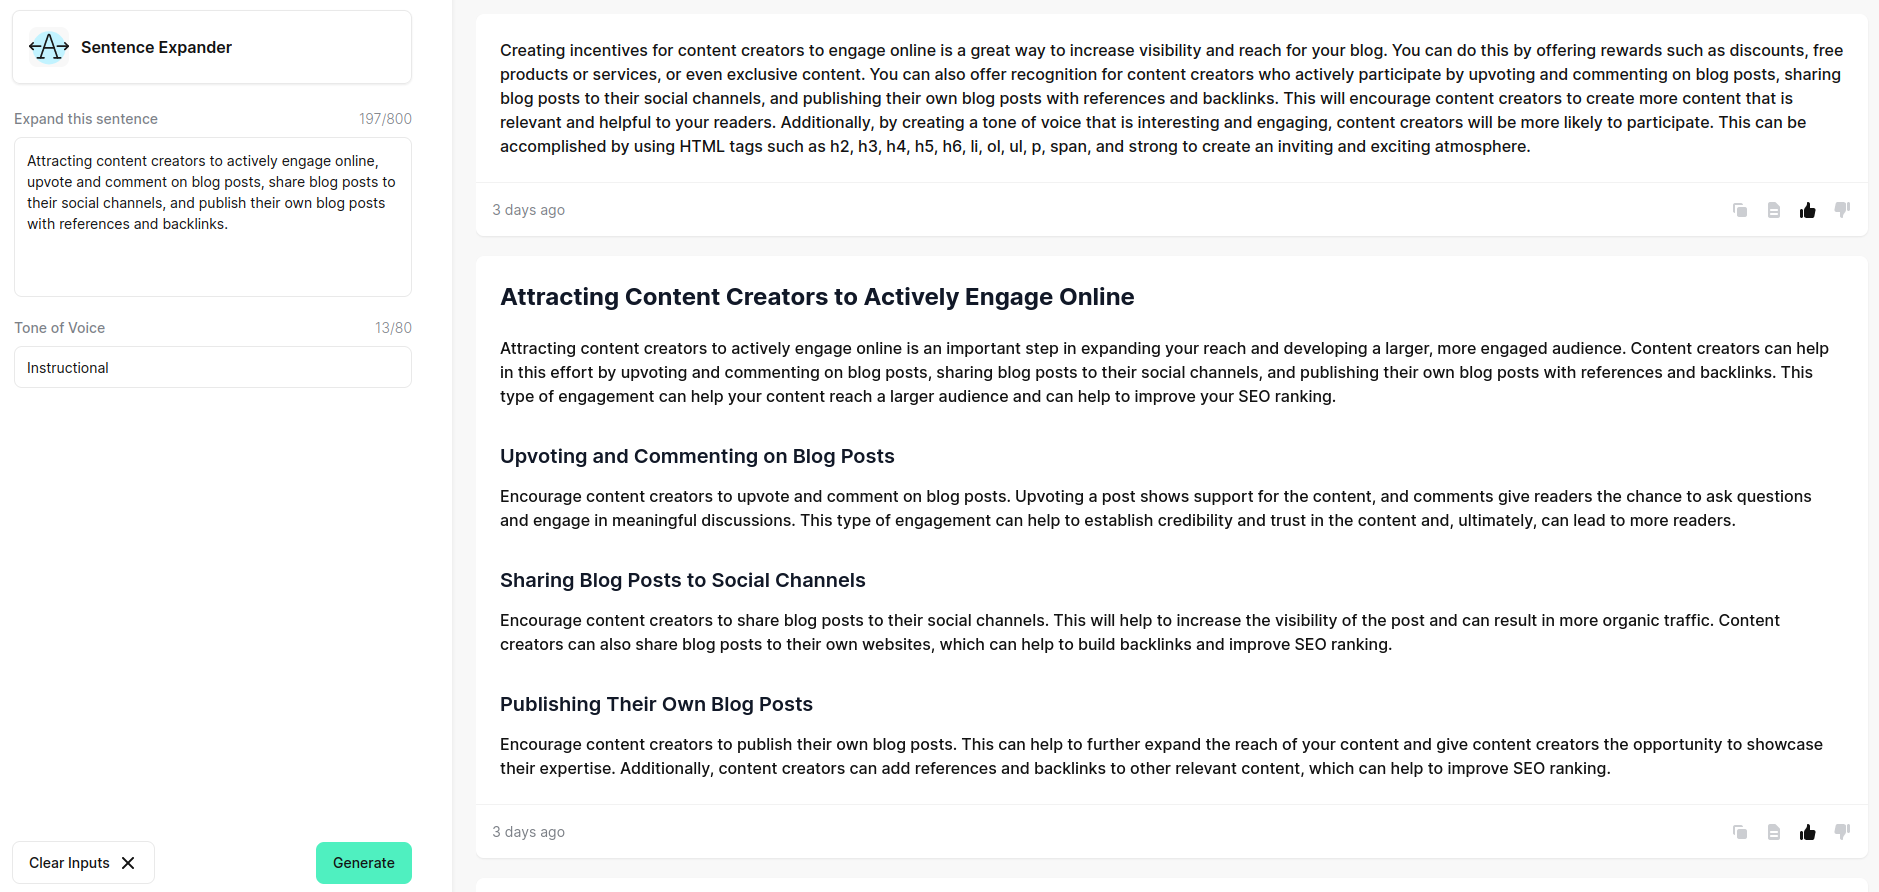 As with all Jounce template output, tweaking the prompt input sharpened the output. The prompt here in text narrative -- attracting content creators to actively engage online -- is similar to the copy in the links used to prompt using Persausive Bullet Points.